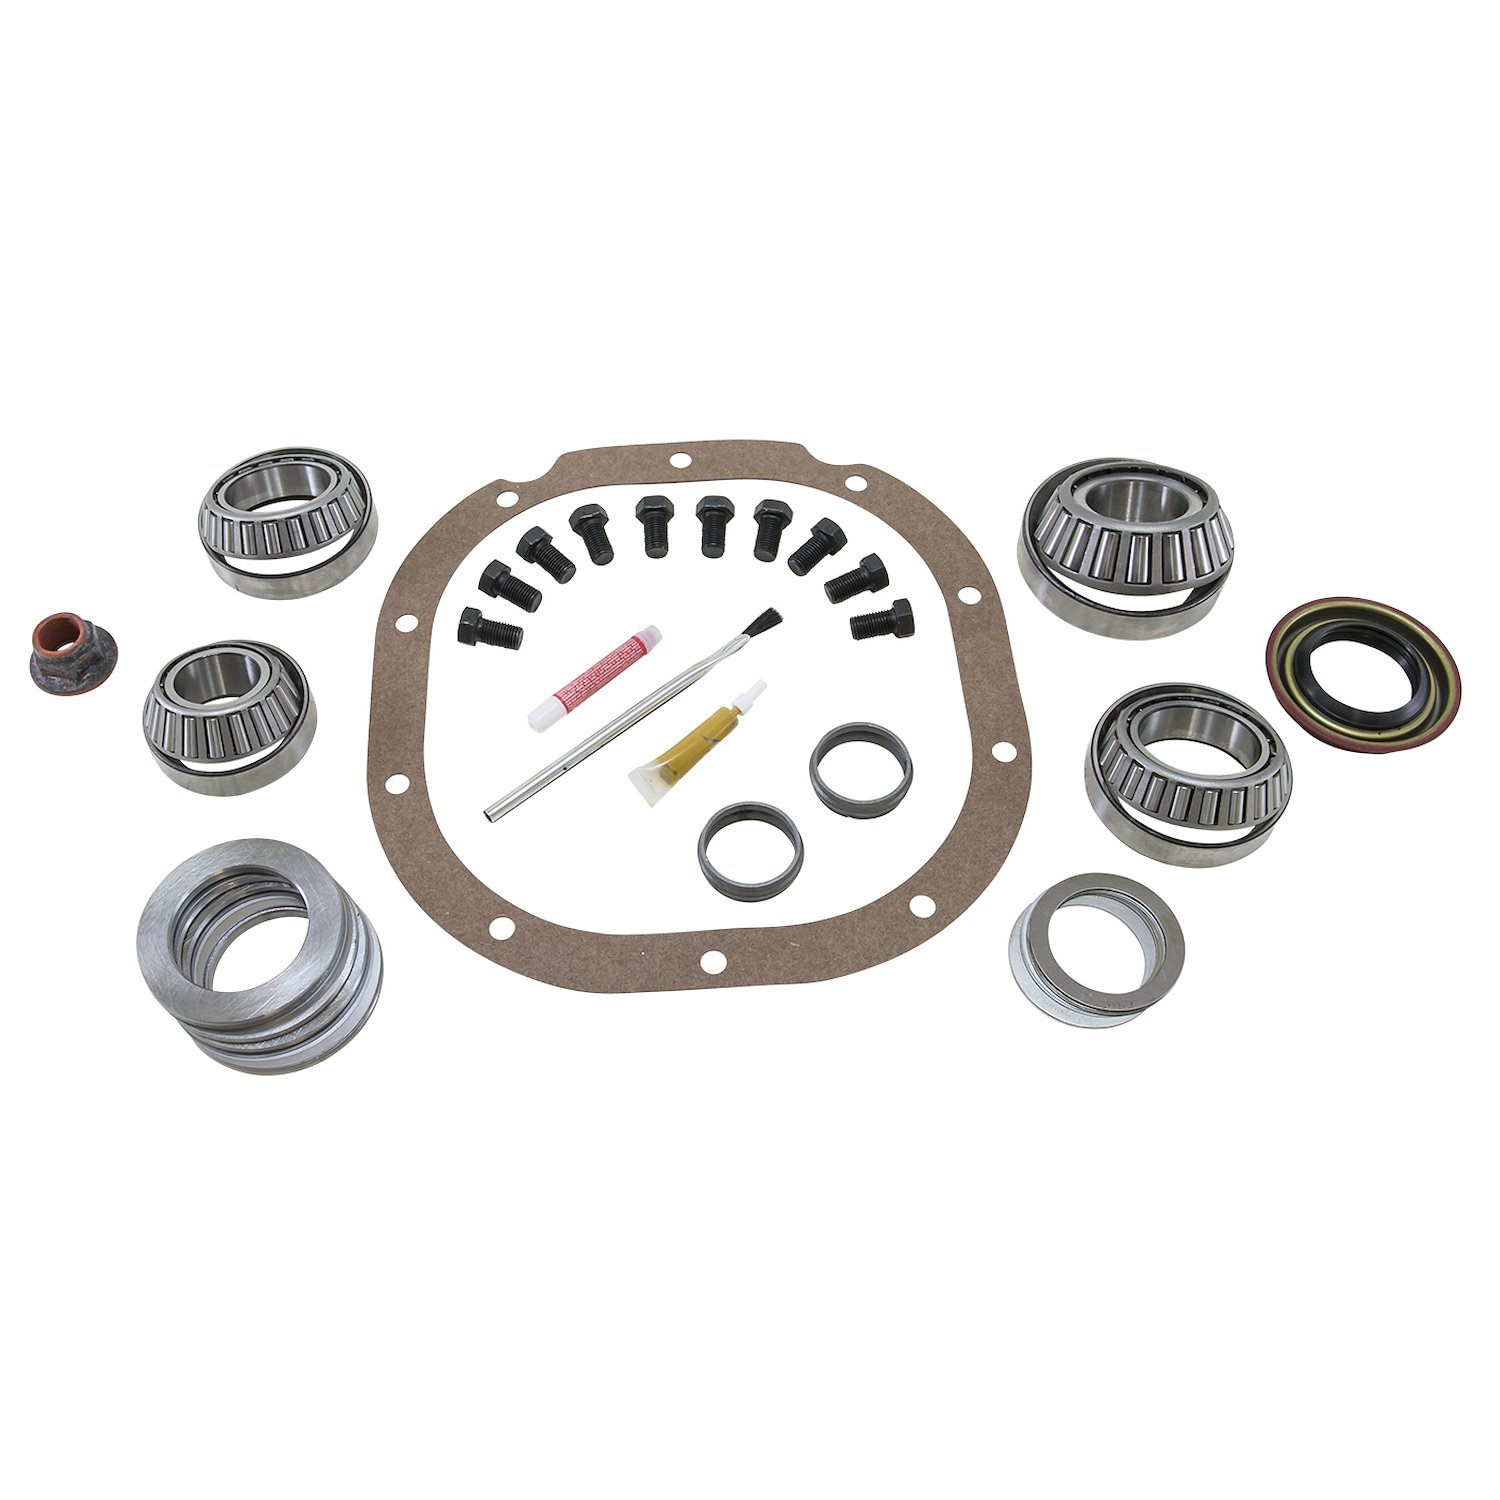 USA Standard ZK F8 Master Overhaul Kit, For The Ford 8 in. Differential